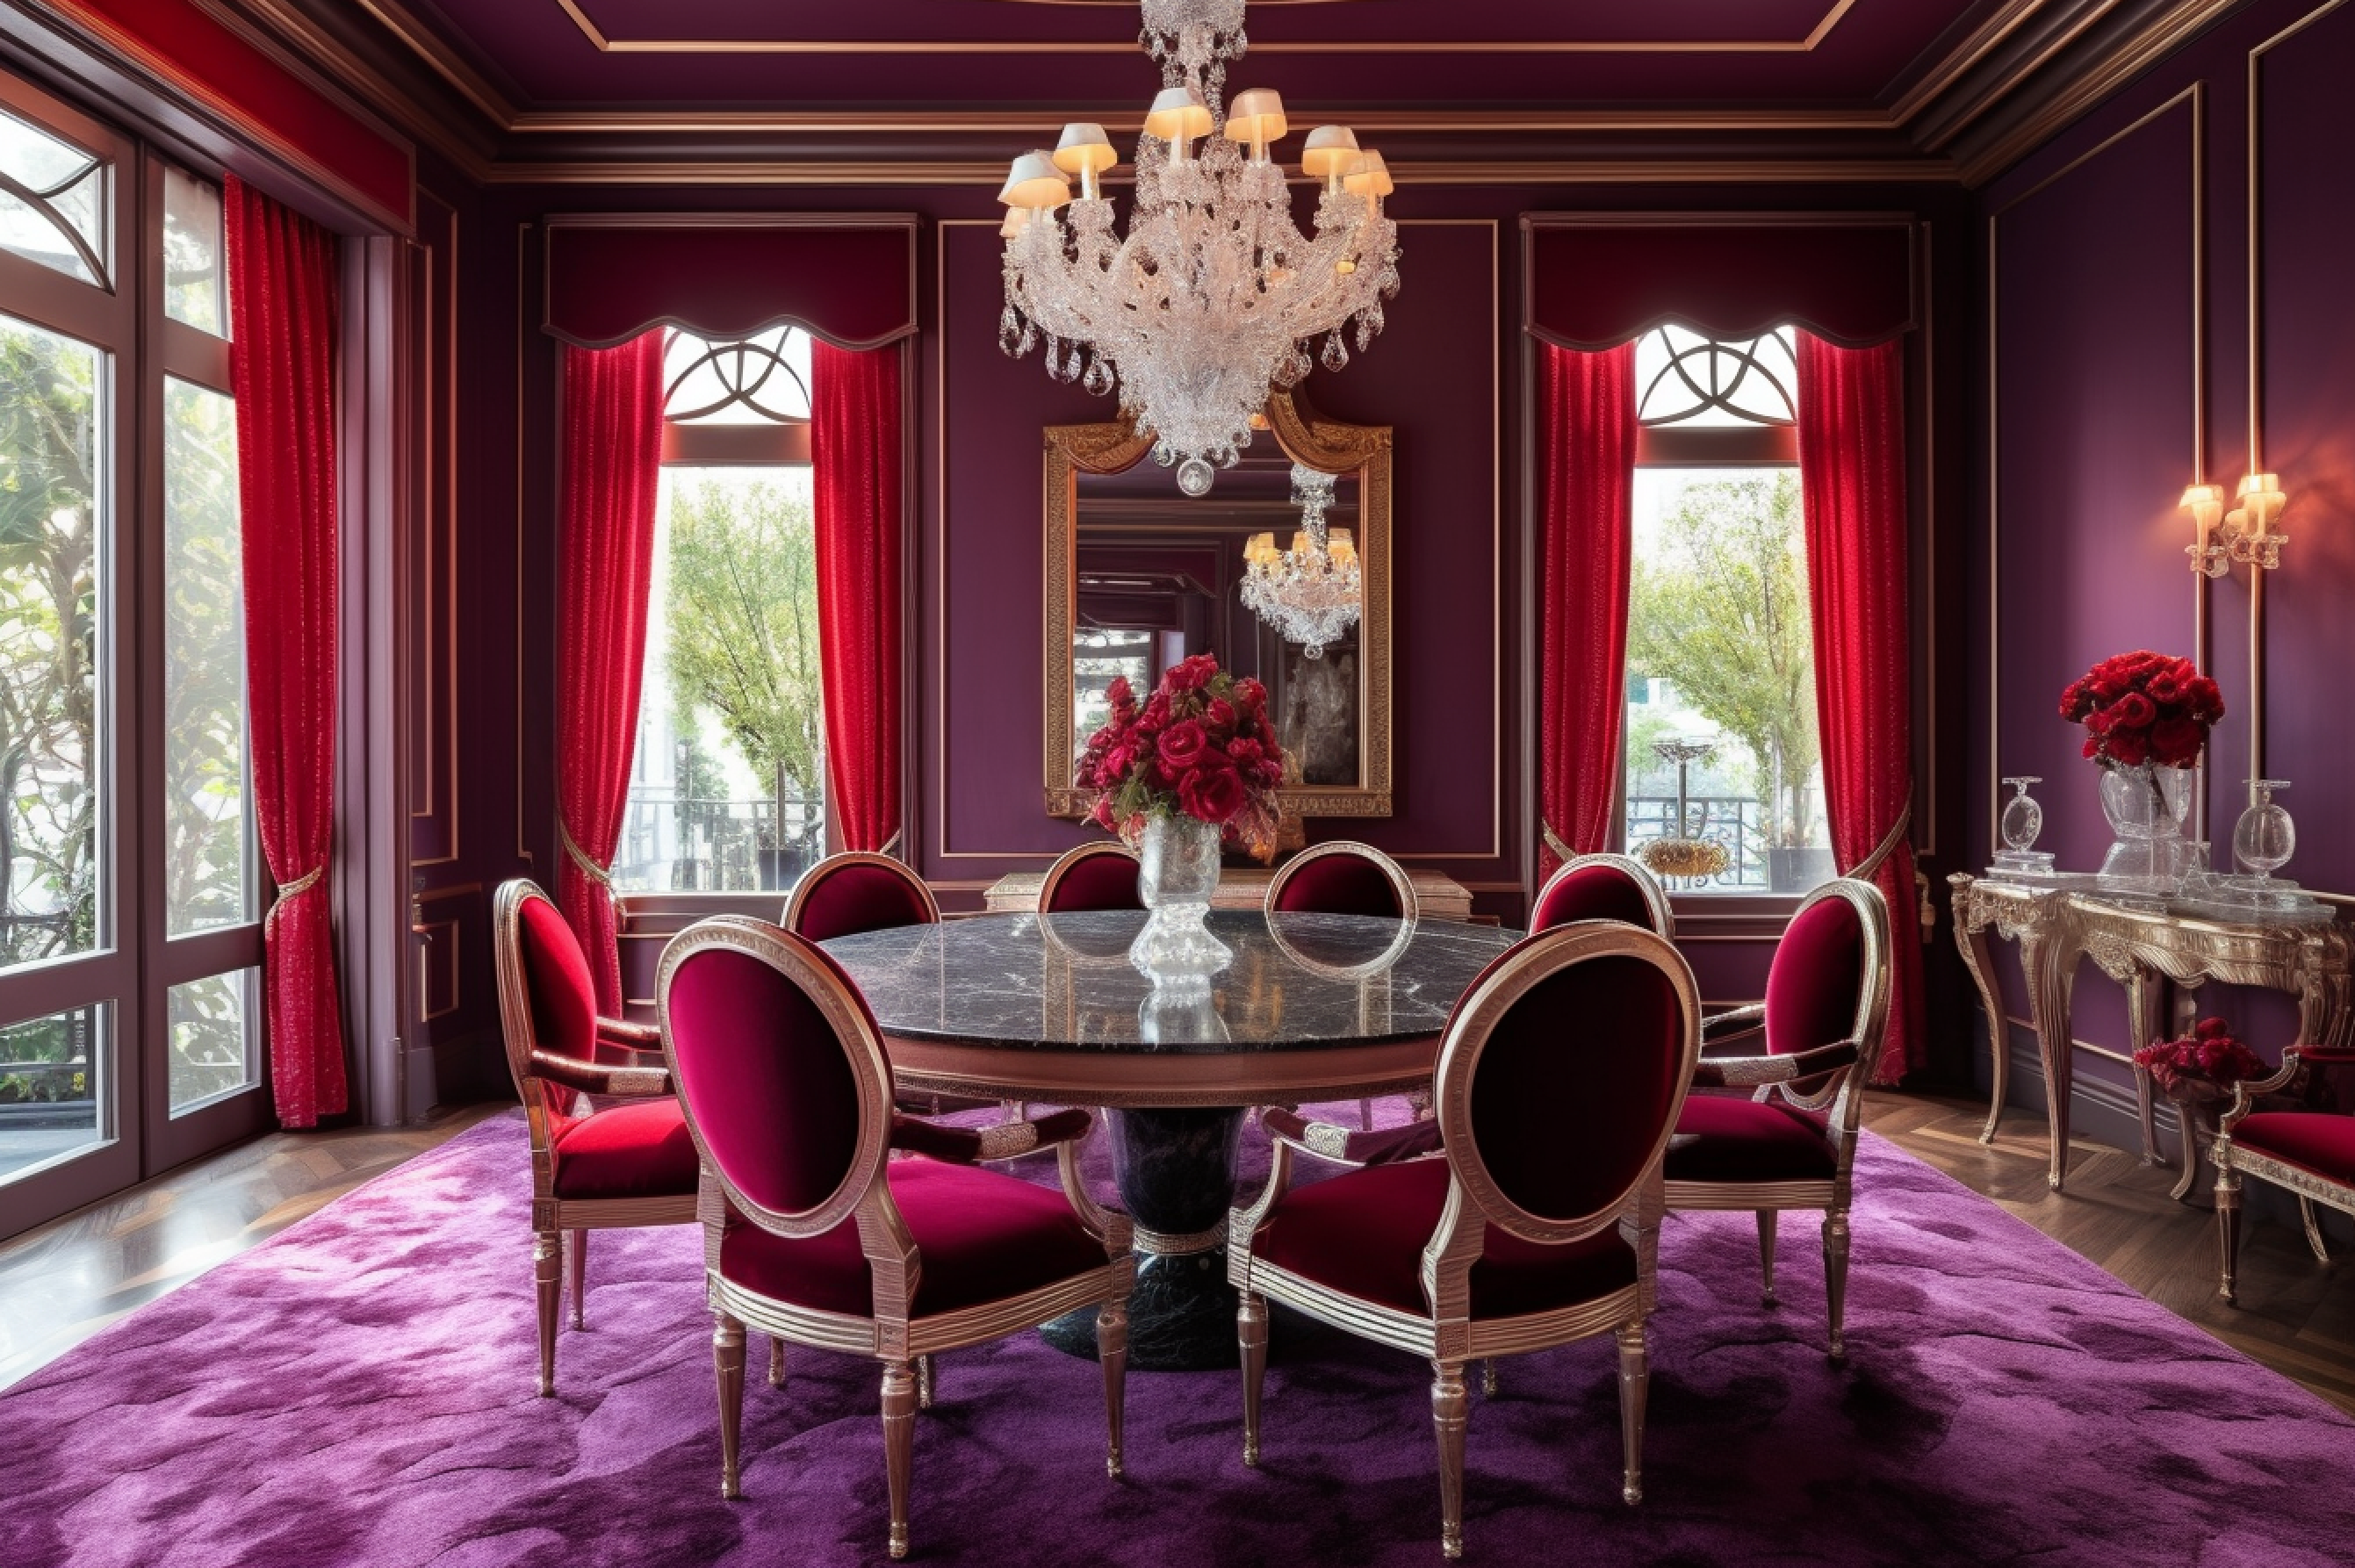 5. Red and Purple Color Scheme - Glamorous Dining Room